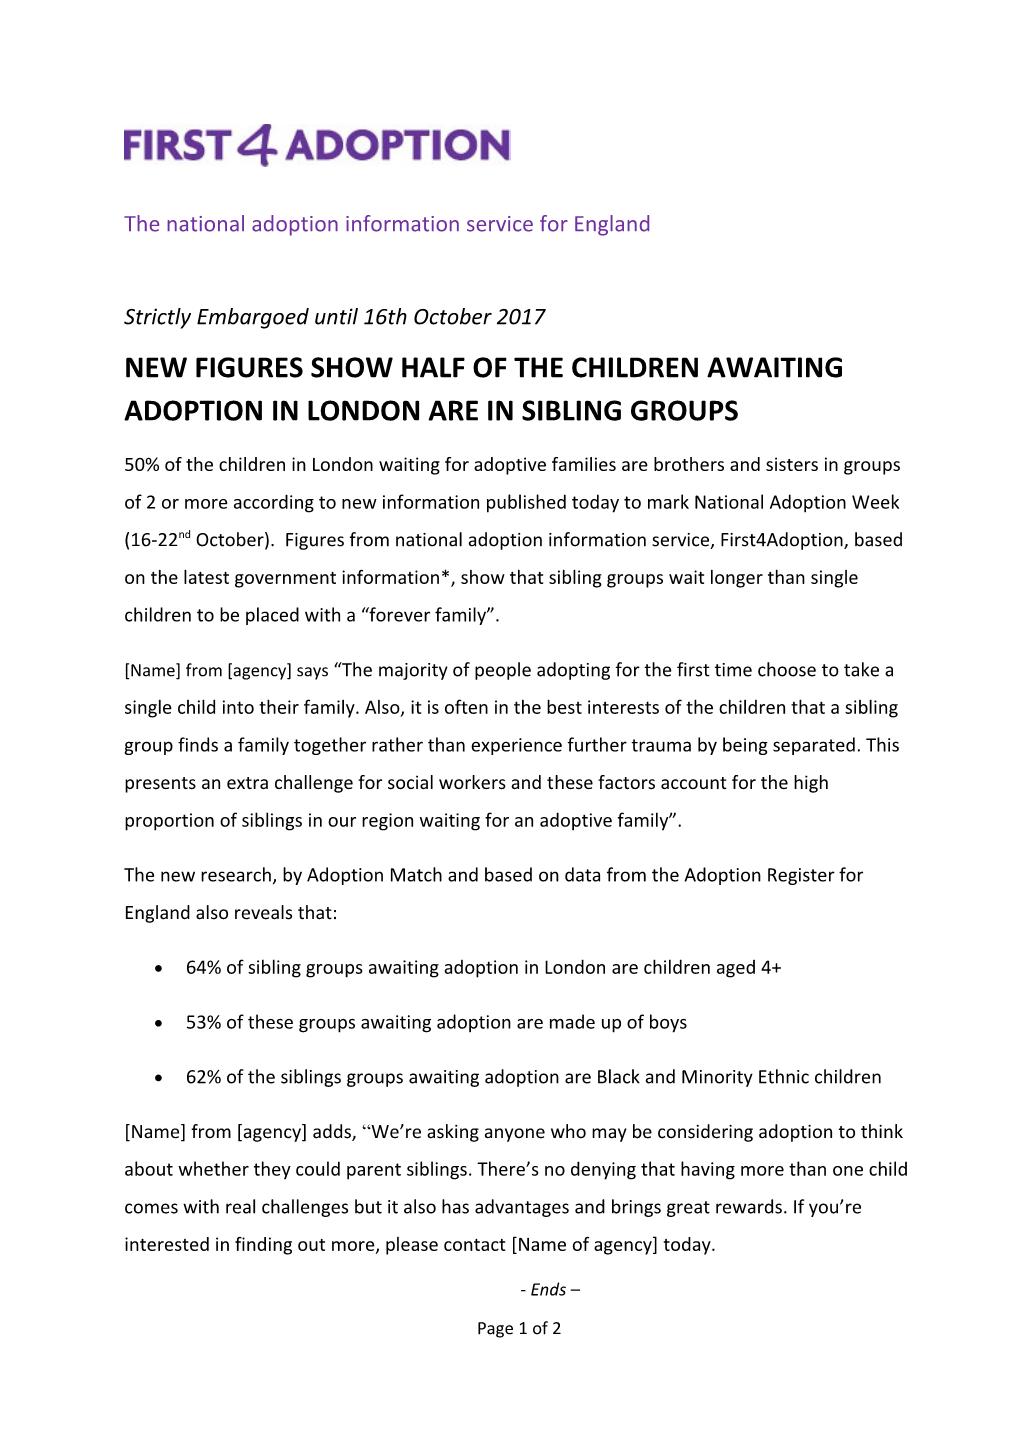 The National Adoption Information Service for England